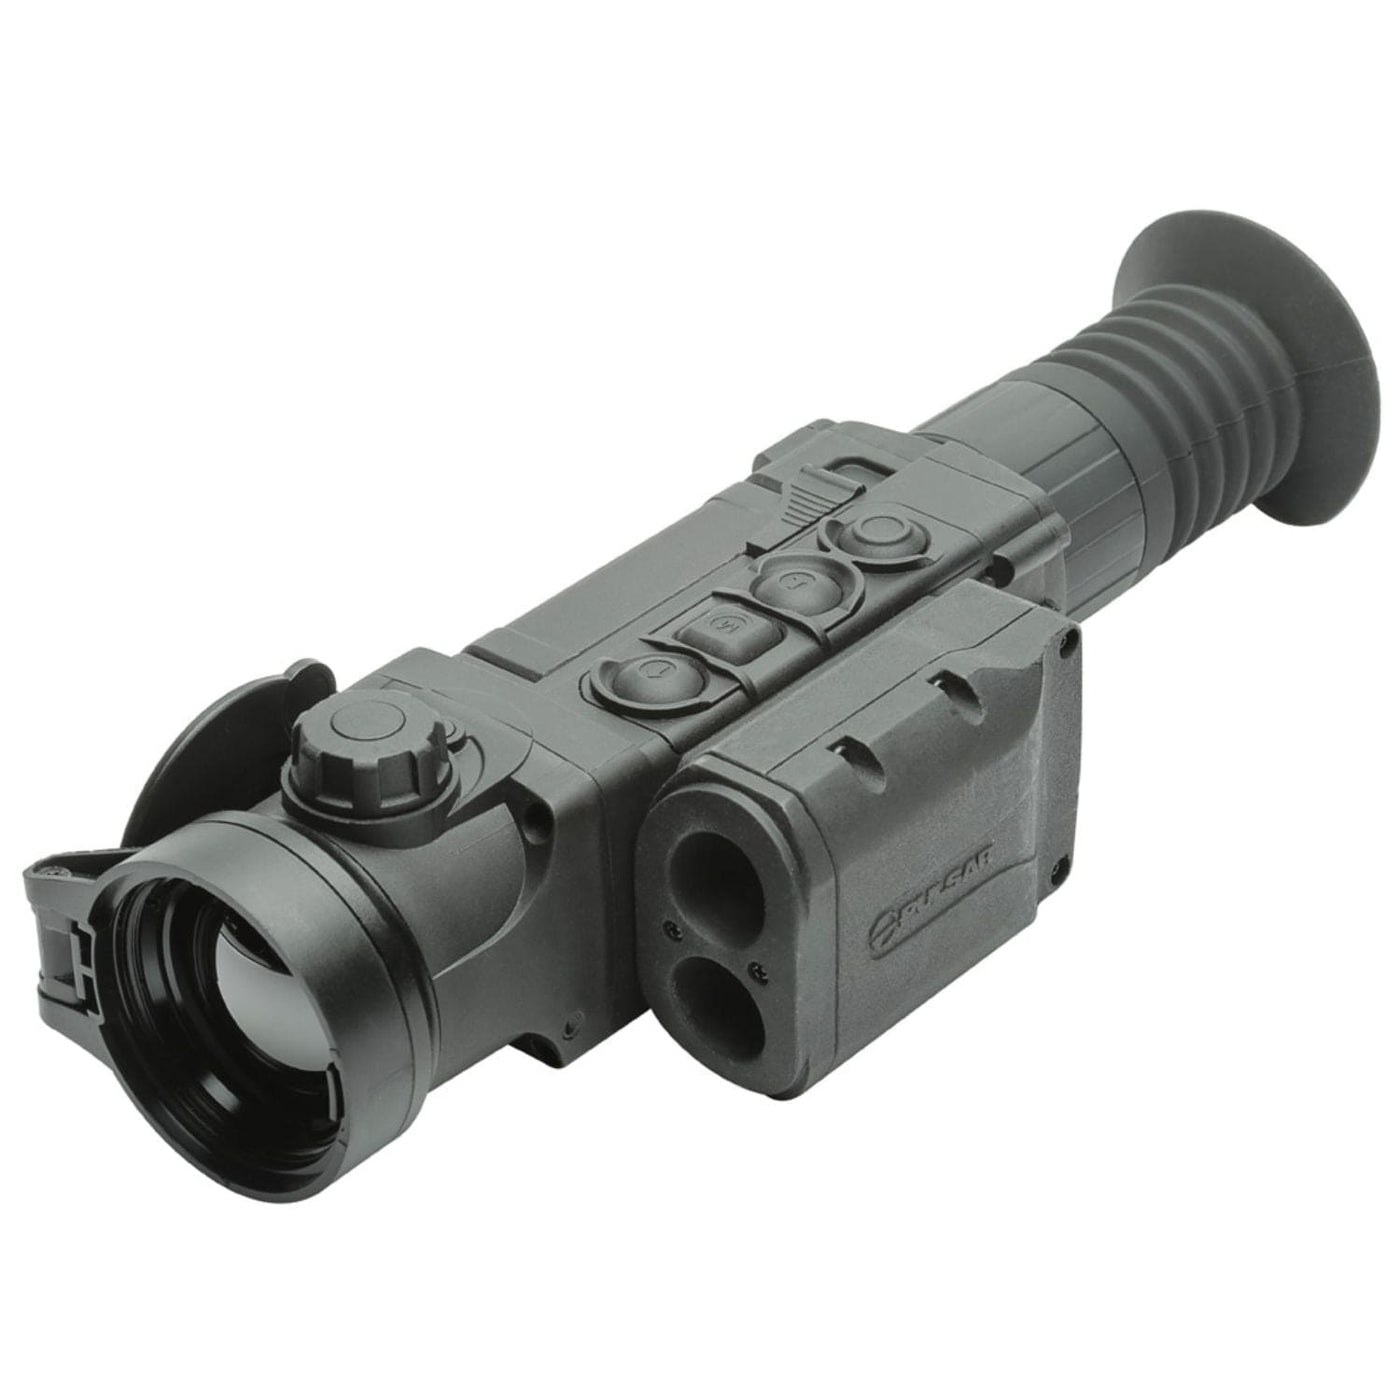 Pulsar Pulsar Trail 2 LRF XP50 Thermal Riflescope Nightvision And Thermal